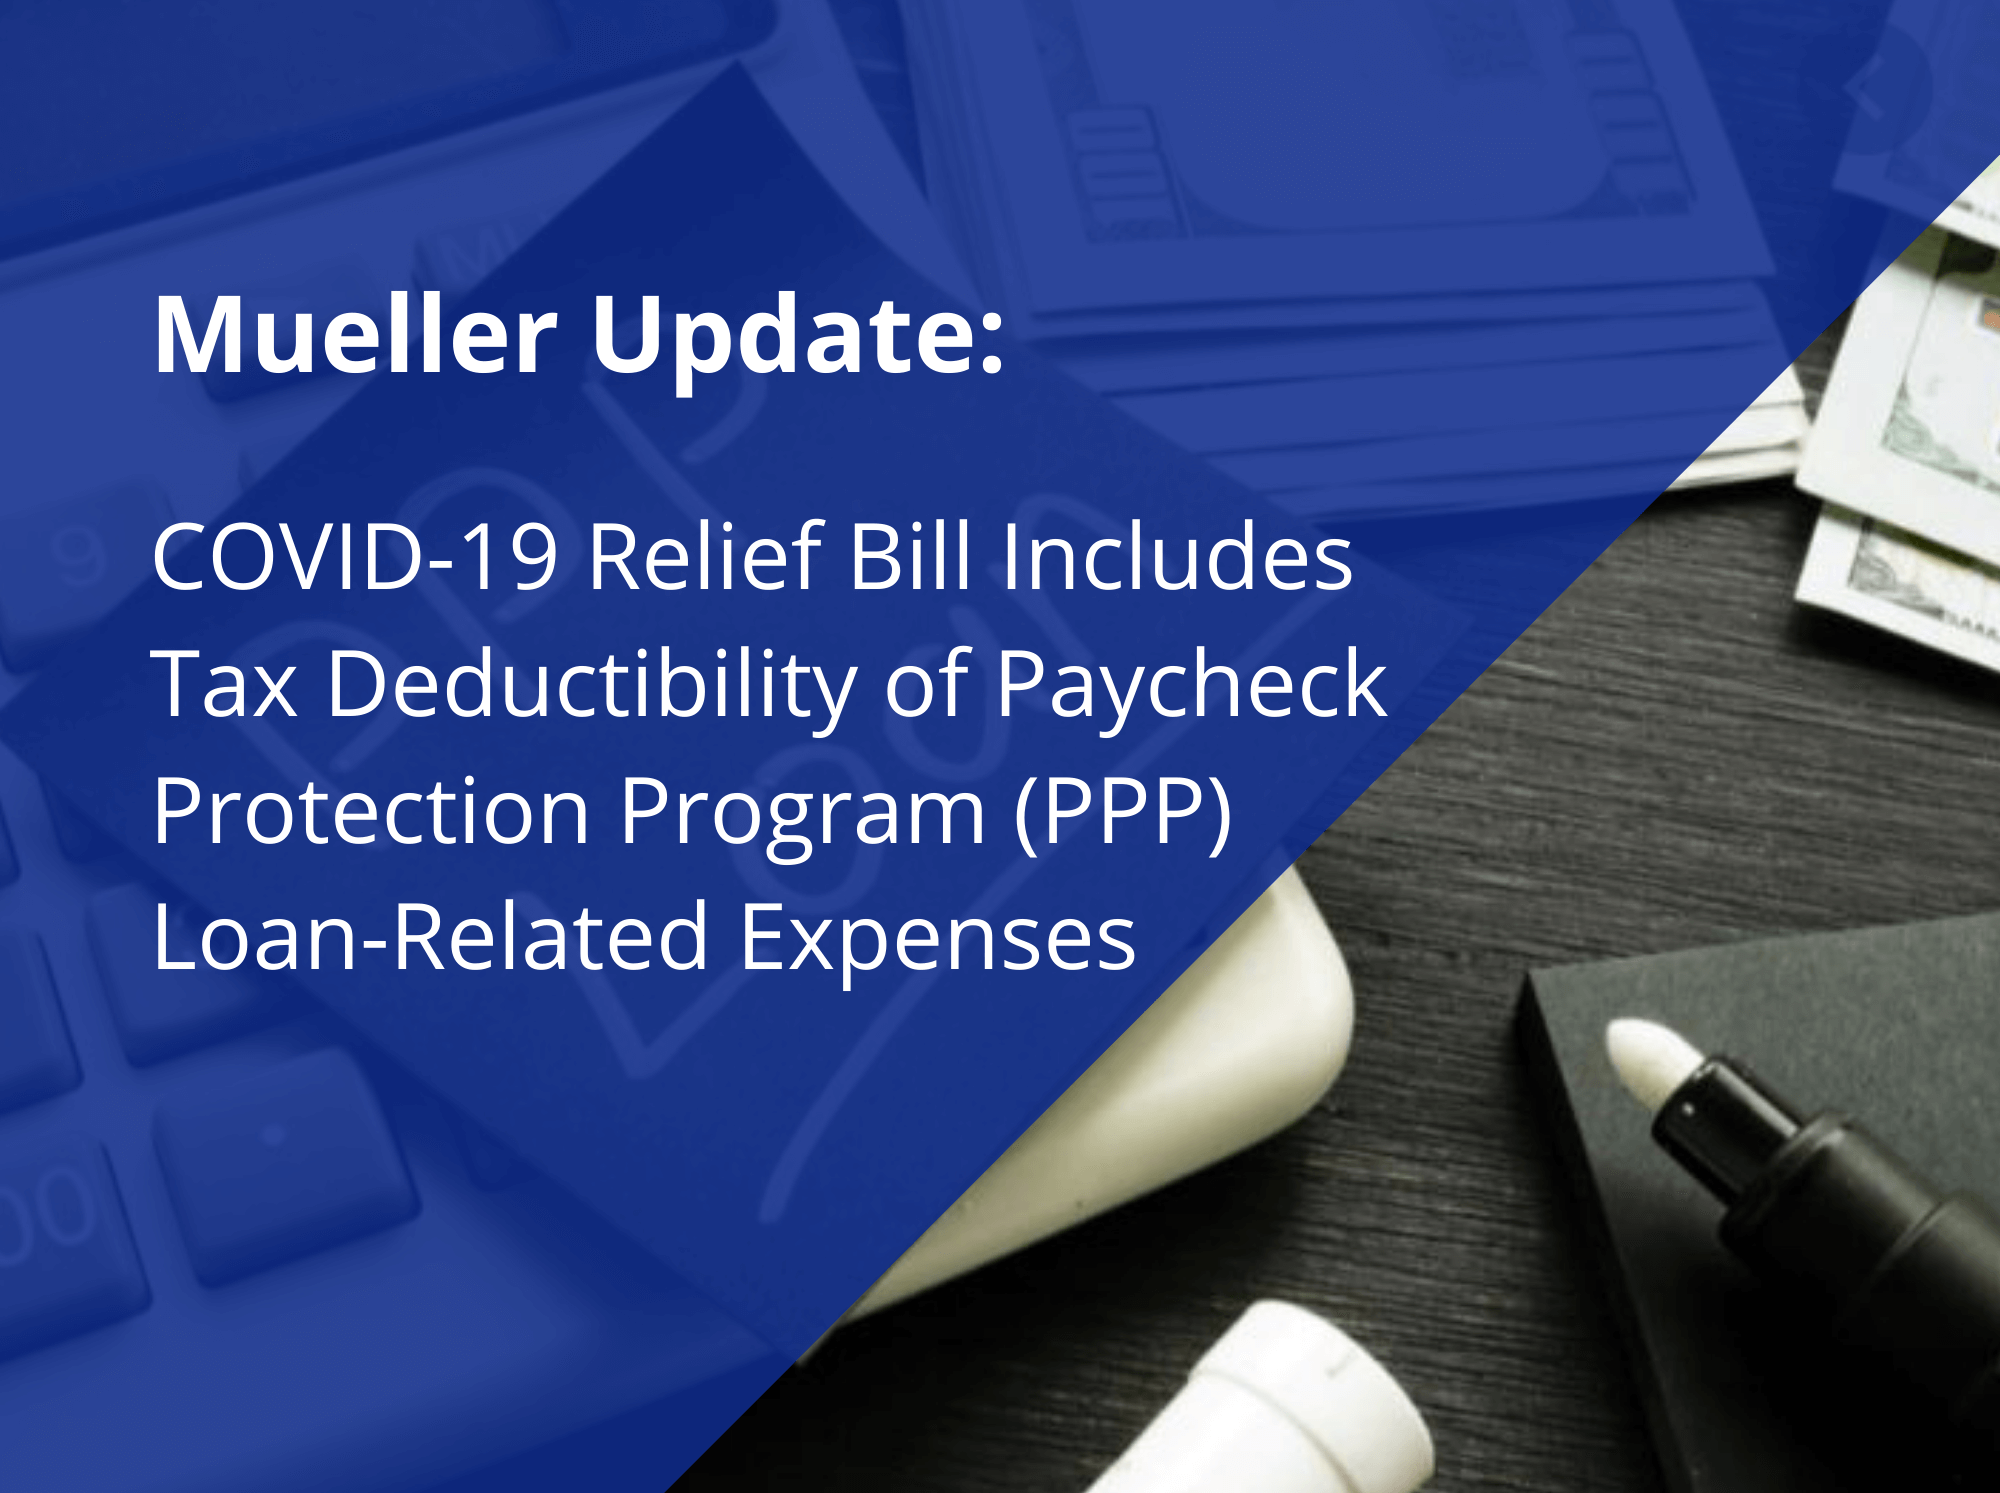 COVID-19 Relief Bill Includes Tax Deductibility of Paycheck Protection Program (PPP) Loan-Related Expenses